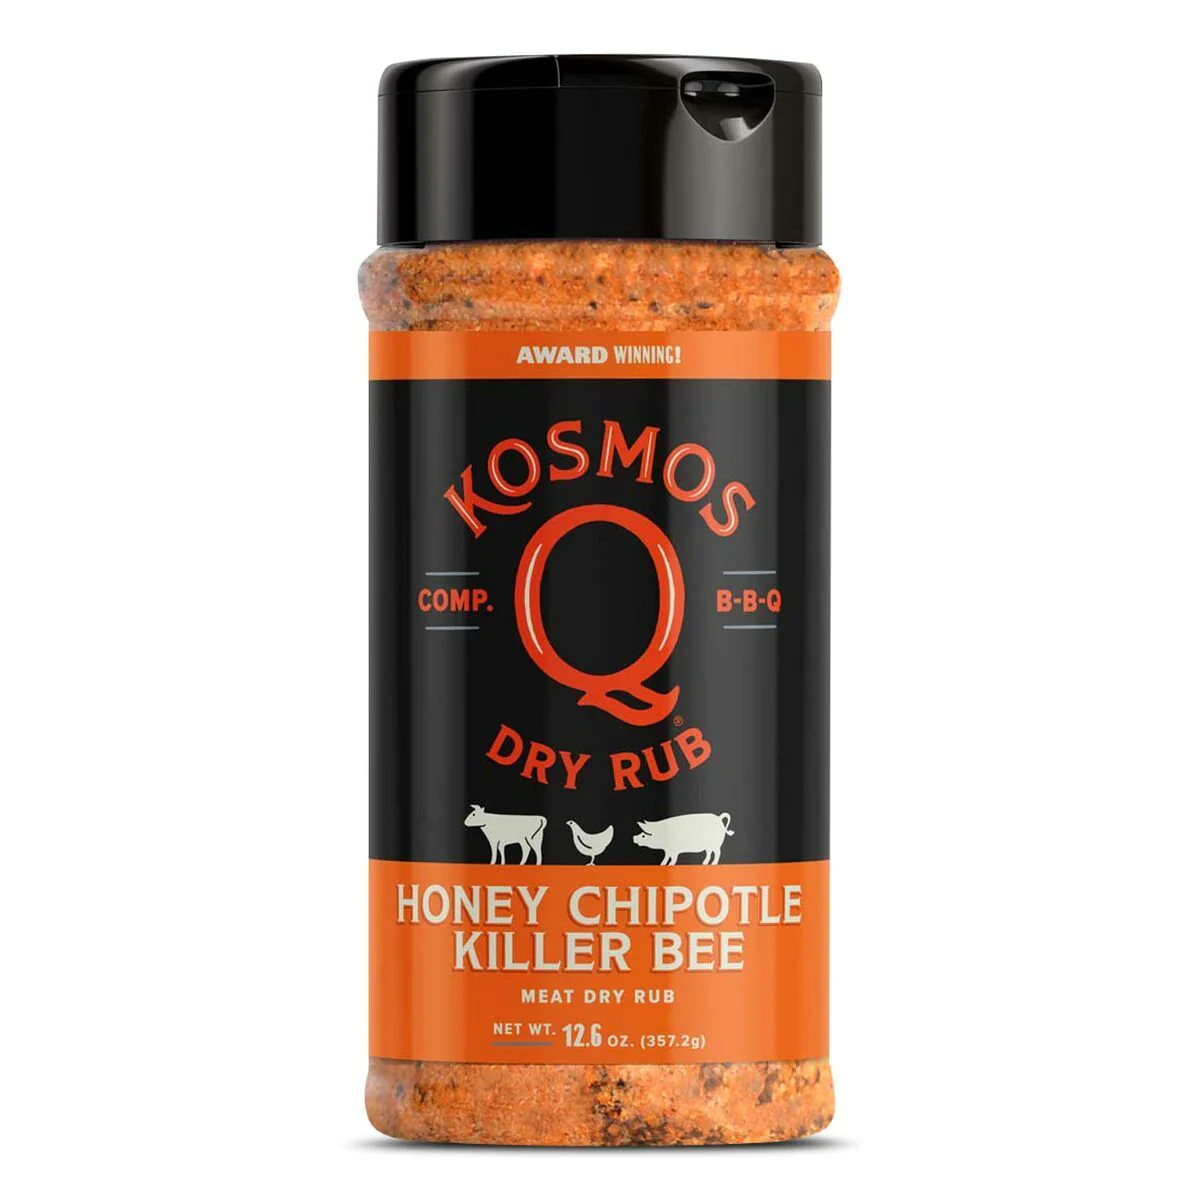 /assets/images/products/product-images/XWTQ8NQFTAWZ2/662002f544d25_kosmo-s-q-barbecue-rubs-shaker-bottle-spicy-killer-bee-chipotle-honey-rub-30190961557663_5000x.webp